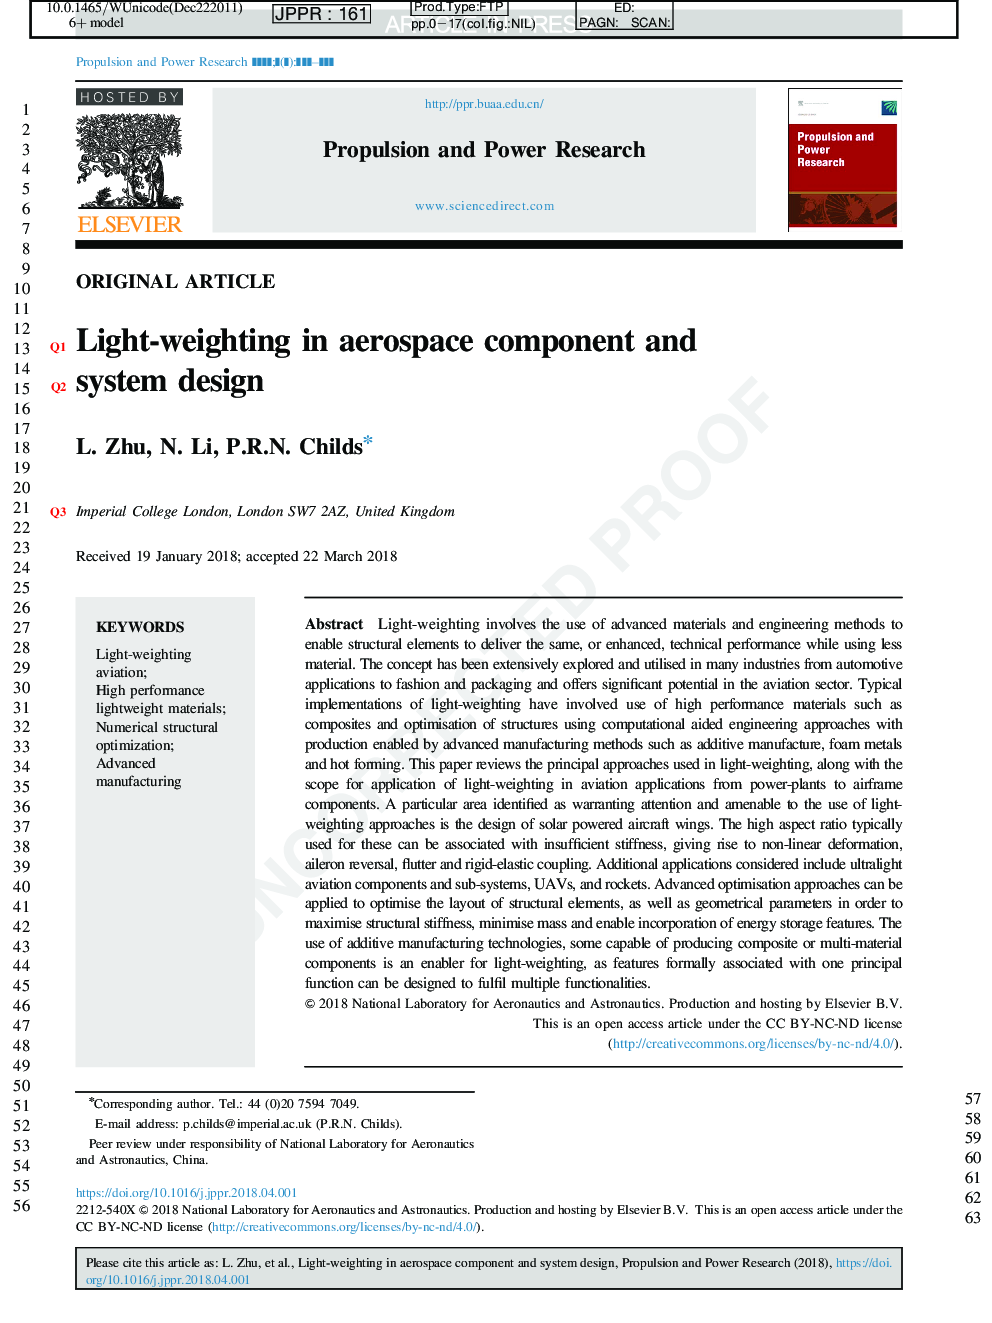 Light-weighting in aerospace component and system design